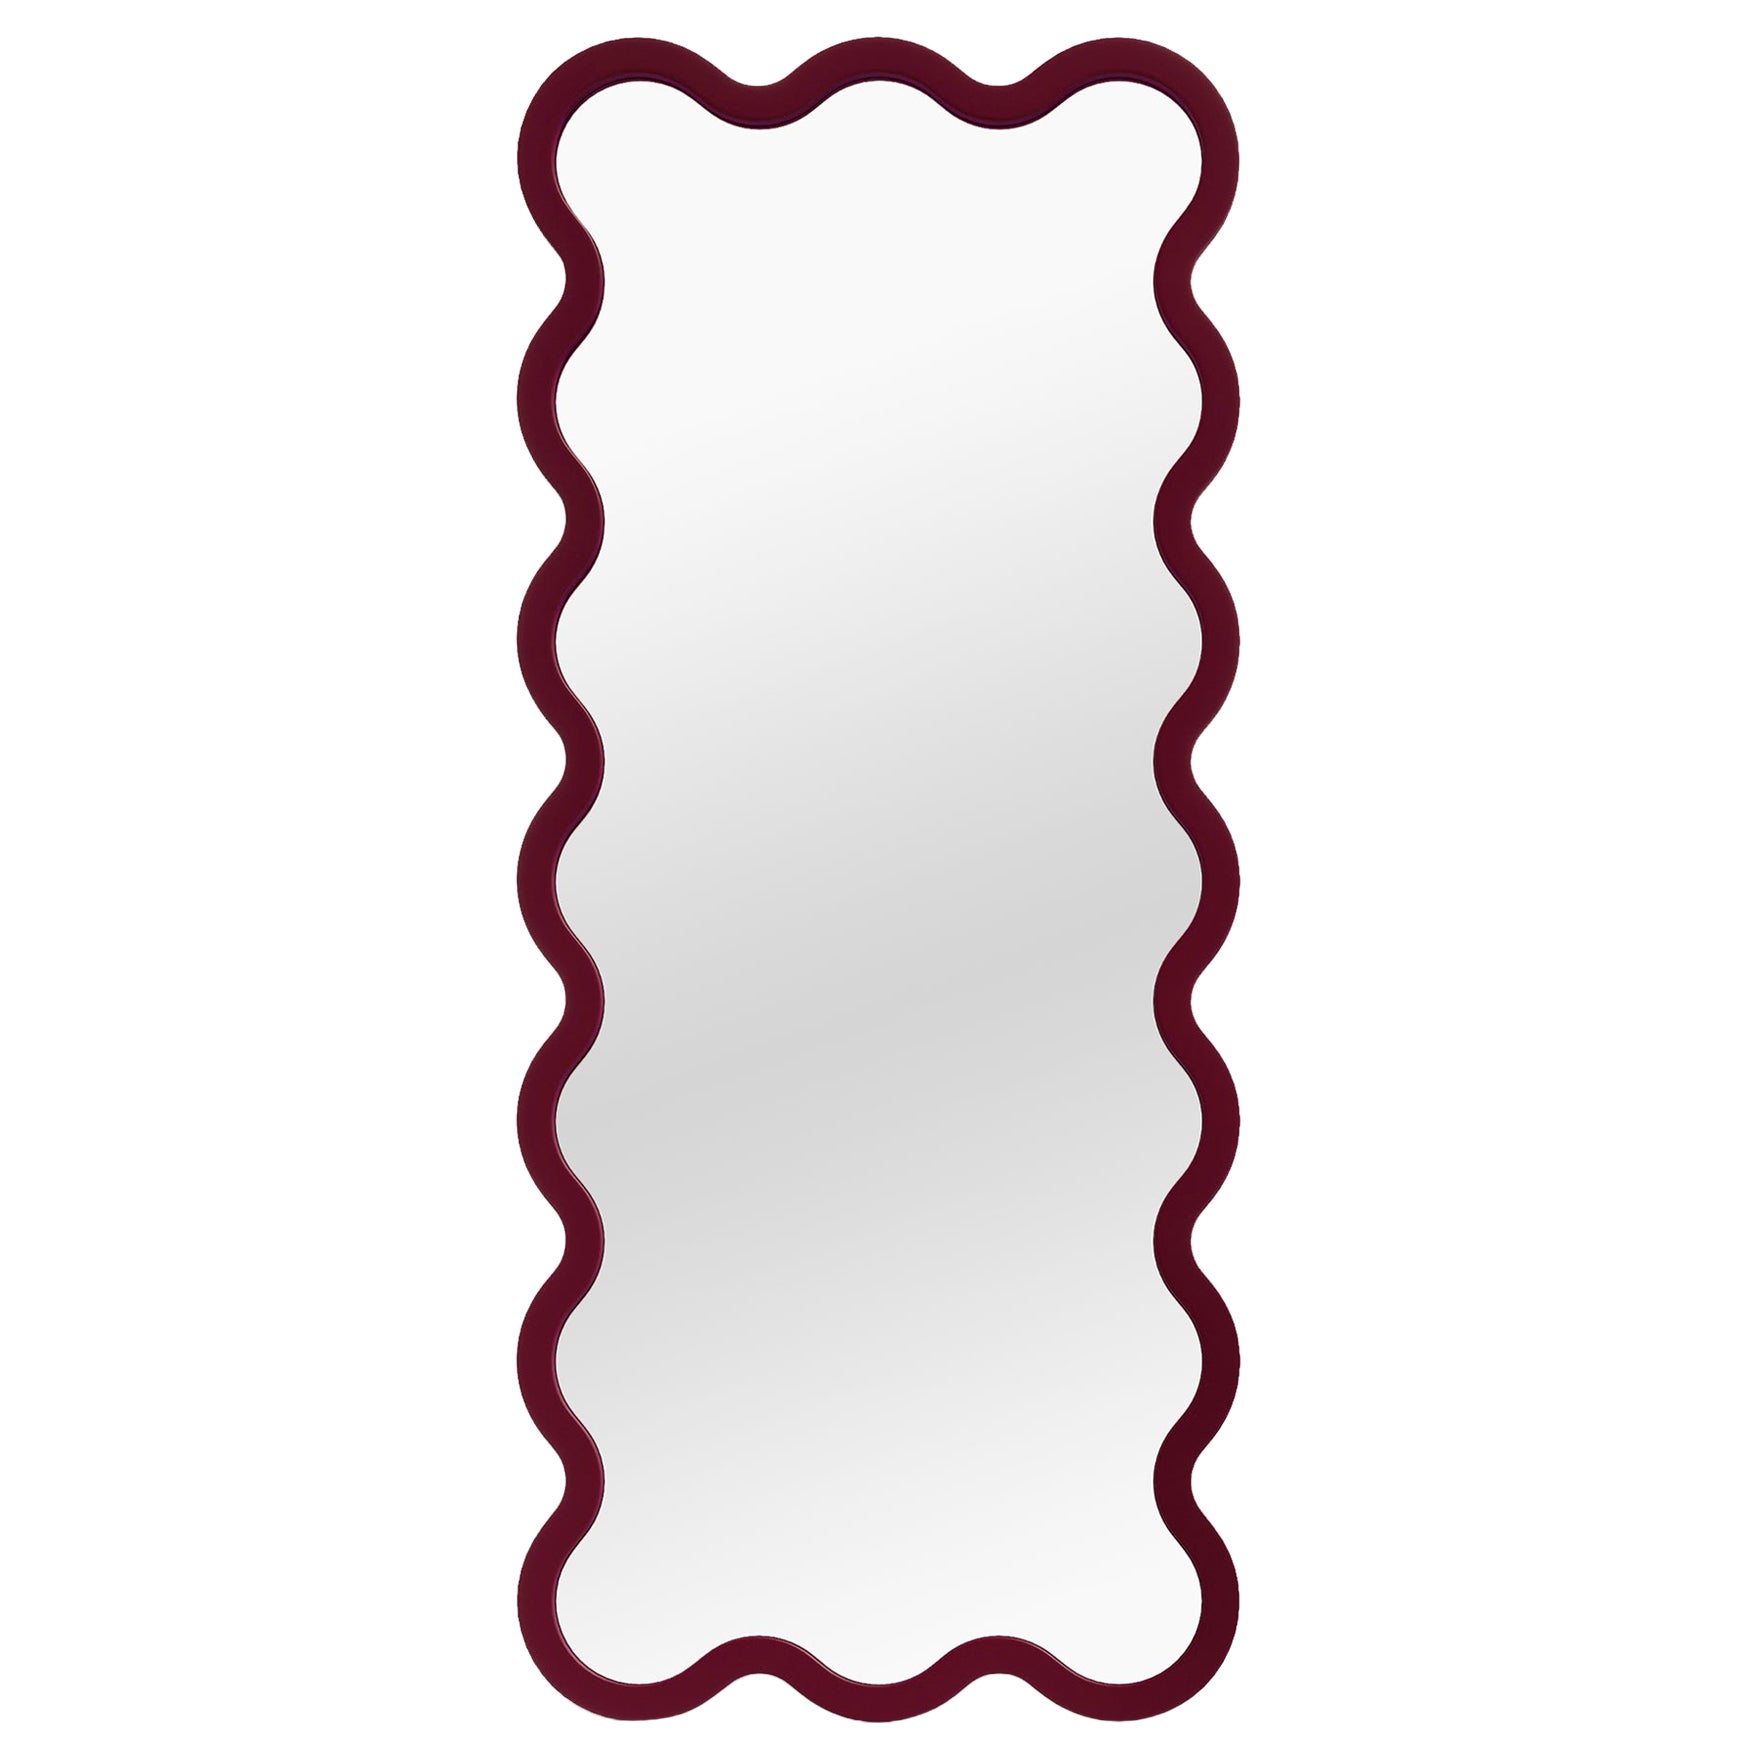 Contemporary Mirror 'Hvyli 16' by Oitoproducts, Dark Red Frame For Sale